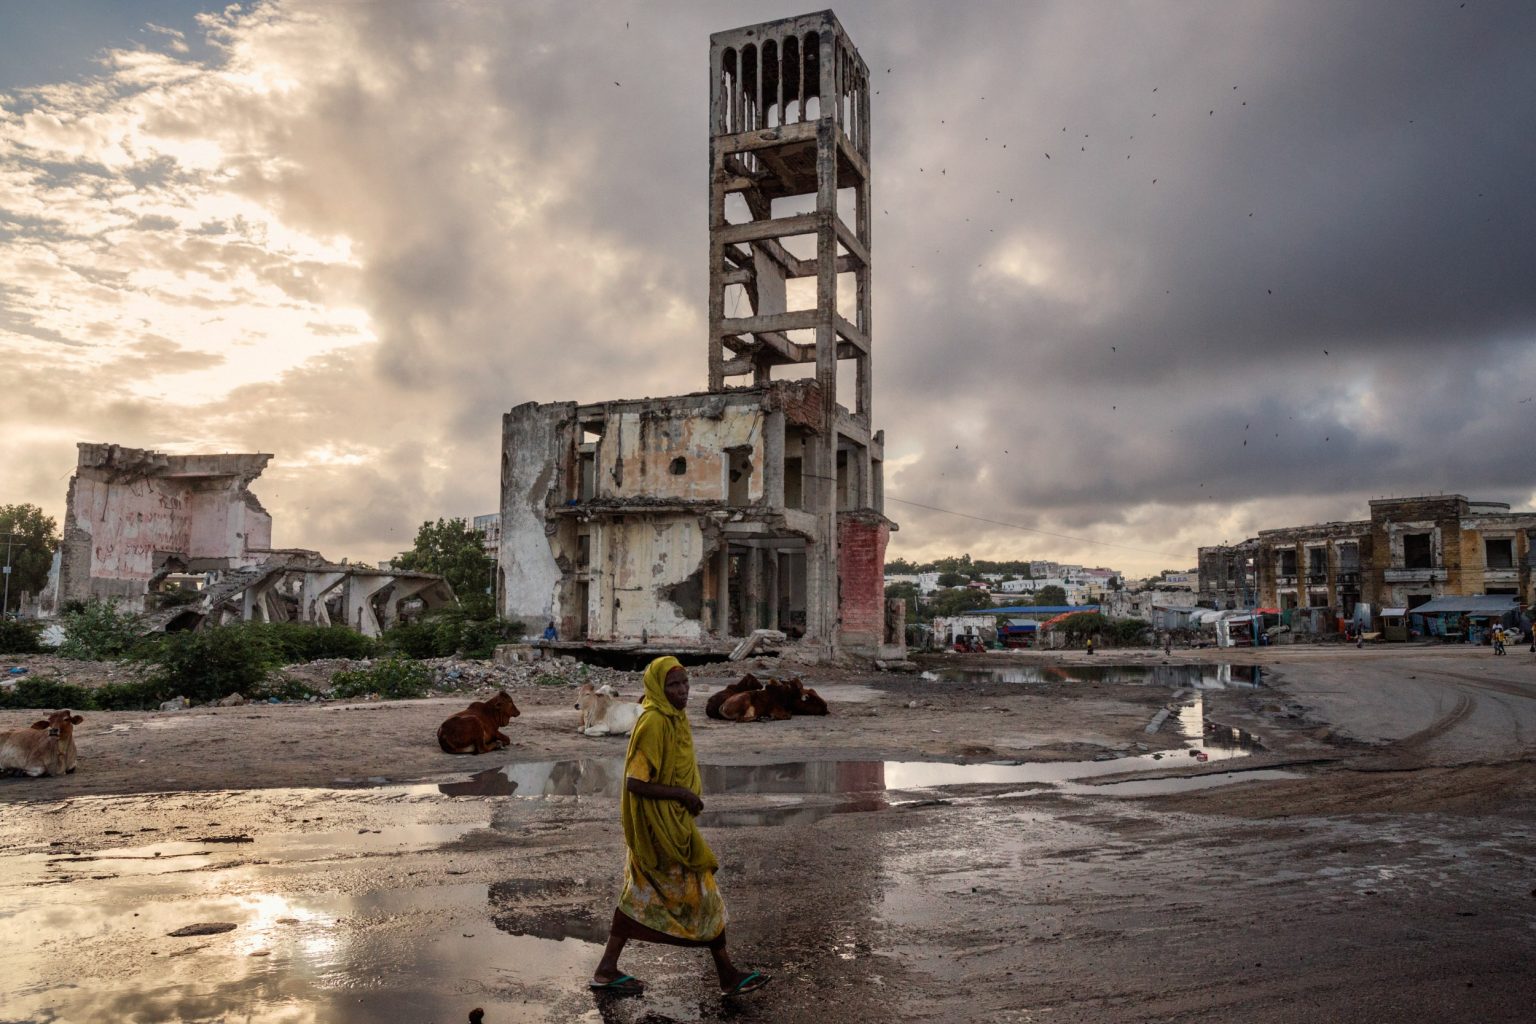 Africa, Somalia, Mogadishu. 19/10/2015. A glimpse of the city: The destroyed structures of the old parliament in the Hamar Weyne district. The present of the Somali capital. Behind it, a civil war lasting 25 years; ahead of it, a future of rebirth. Mogadishu is at a crossroads. On the one side, the persistence of a surreptitious conflict based on a new, asymmetrical strategy of terror with Al-Shabaab, yet on the other, a desire for a return to normal life on the part of the Somali people, who are timidly seeking to carve out a role for themselves.